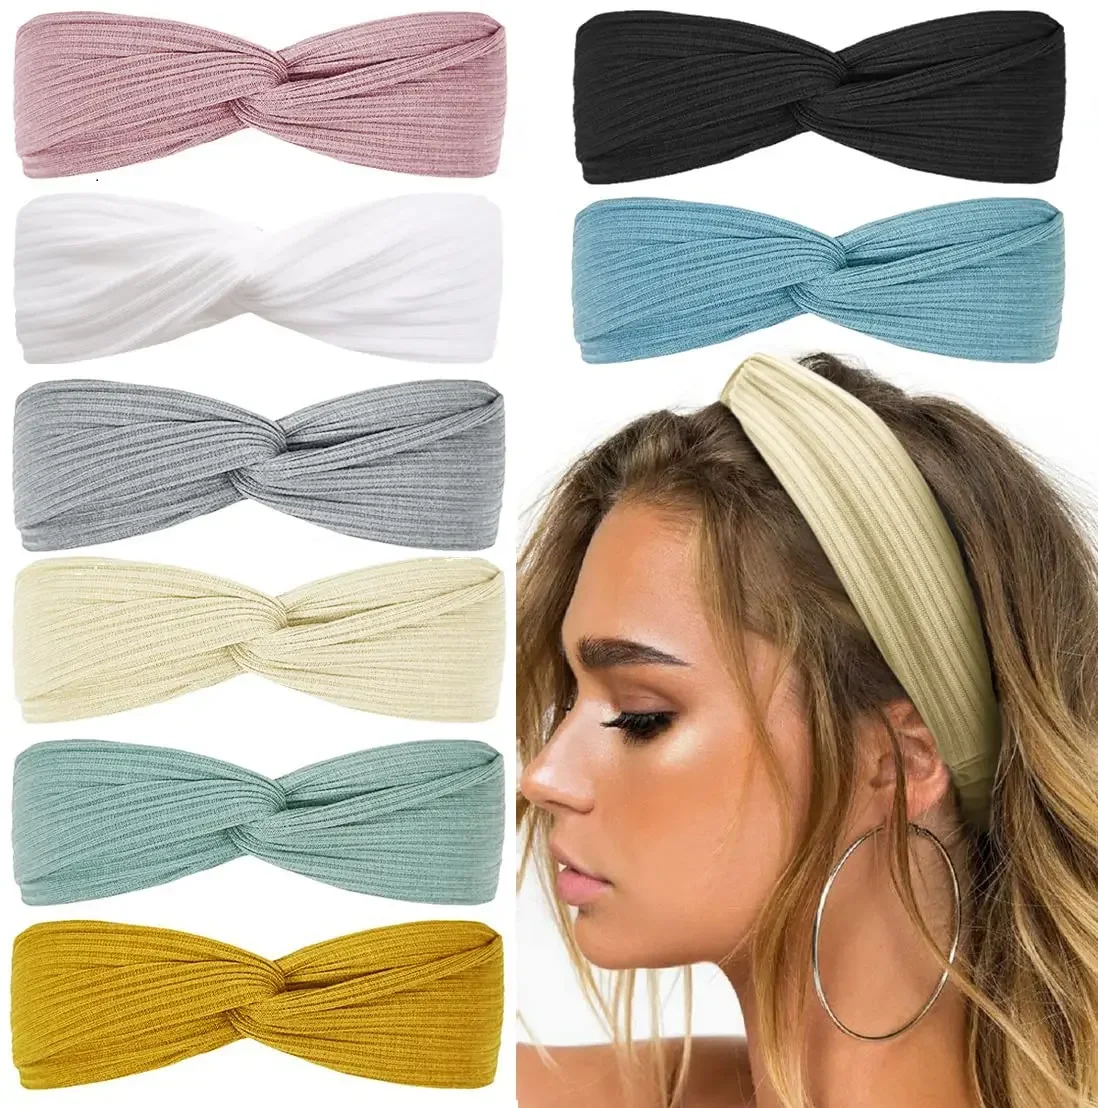 8Pcs Boho Head Bands for Women's Hair Non Slip Twist Hair Bands for Short Hair Fashion Summer Hair Accessories, Solid Color 6 8pcs full set ins color fancy gem style stickers decor scrapbooking lable korean pearl stationery postcards sticker suppli